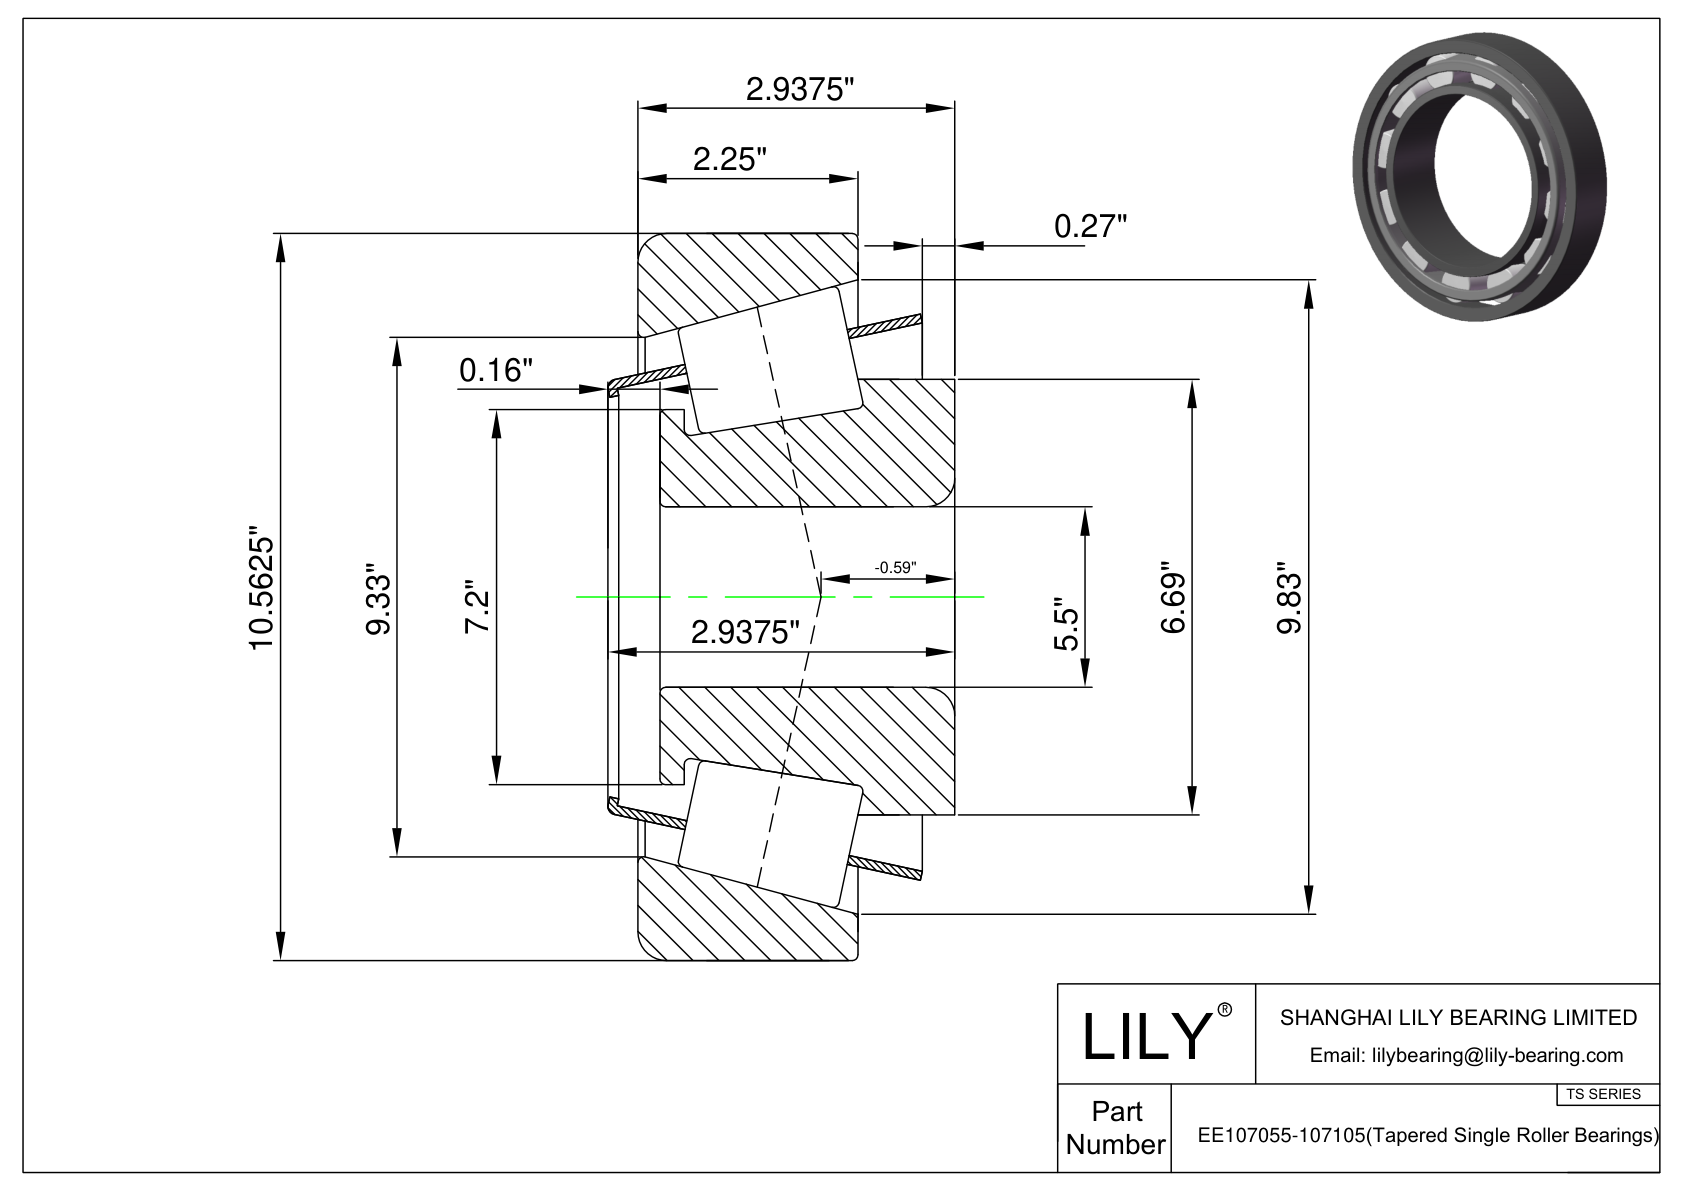 EE107055-107105 TS (Tapered Single Roller Bearings) (Imperial) cad drawing